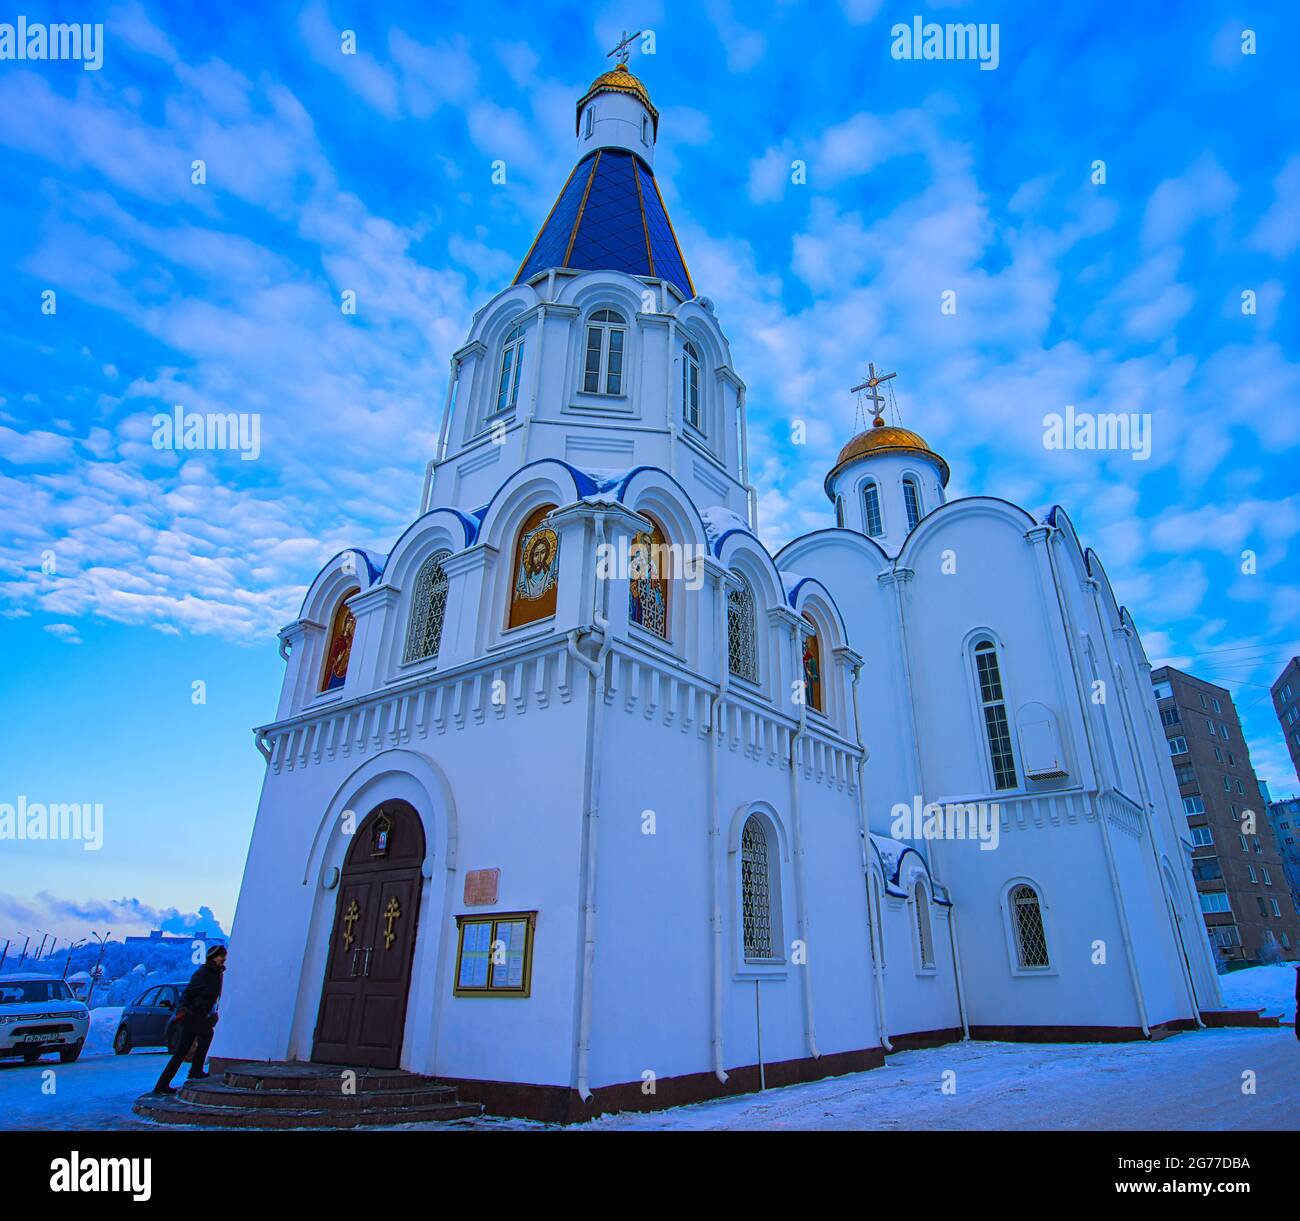 The Monument to the Nuclear Submarine of the Kursk. Murmansk, Russia. Memorial to the brave soldiers who died in the disaster. Snow and church. Mar 20 Stock Photo